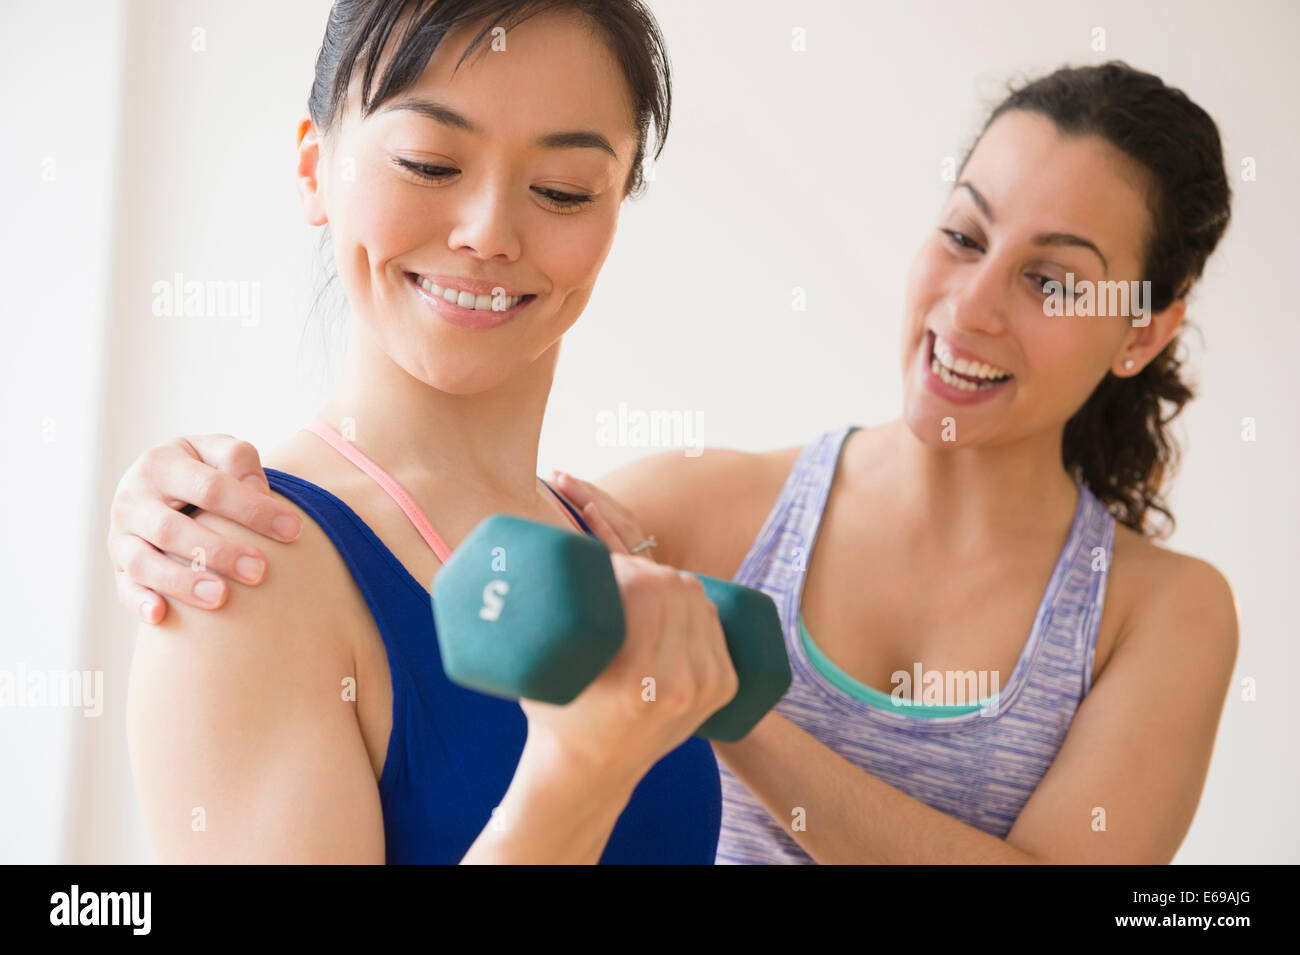 Women exercising together in gym Stock Photo